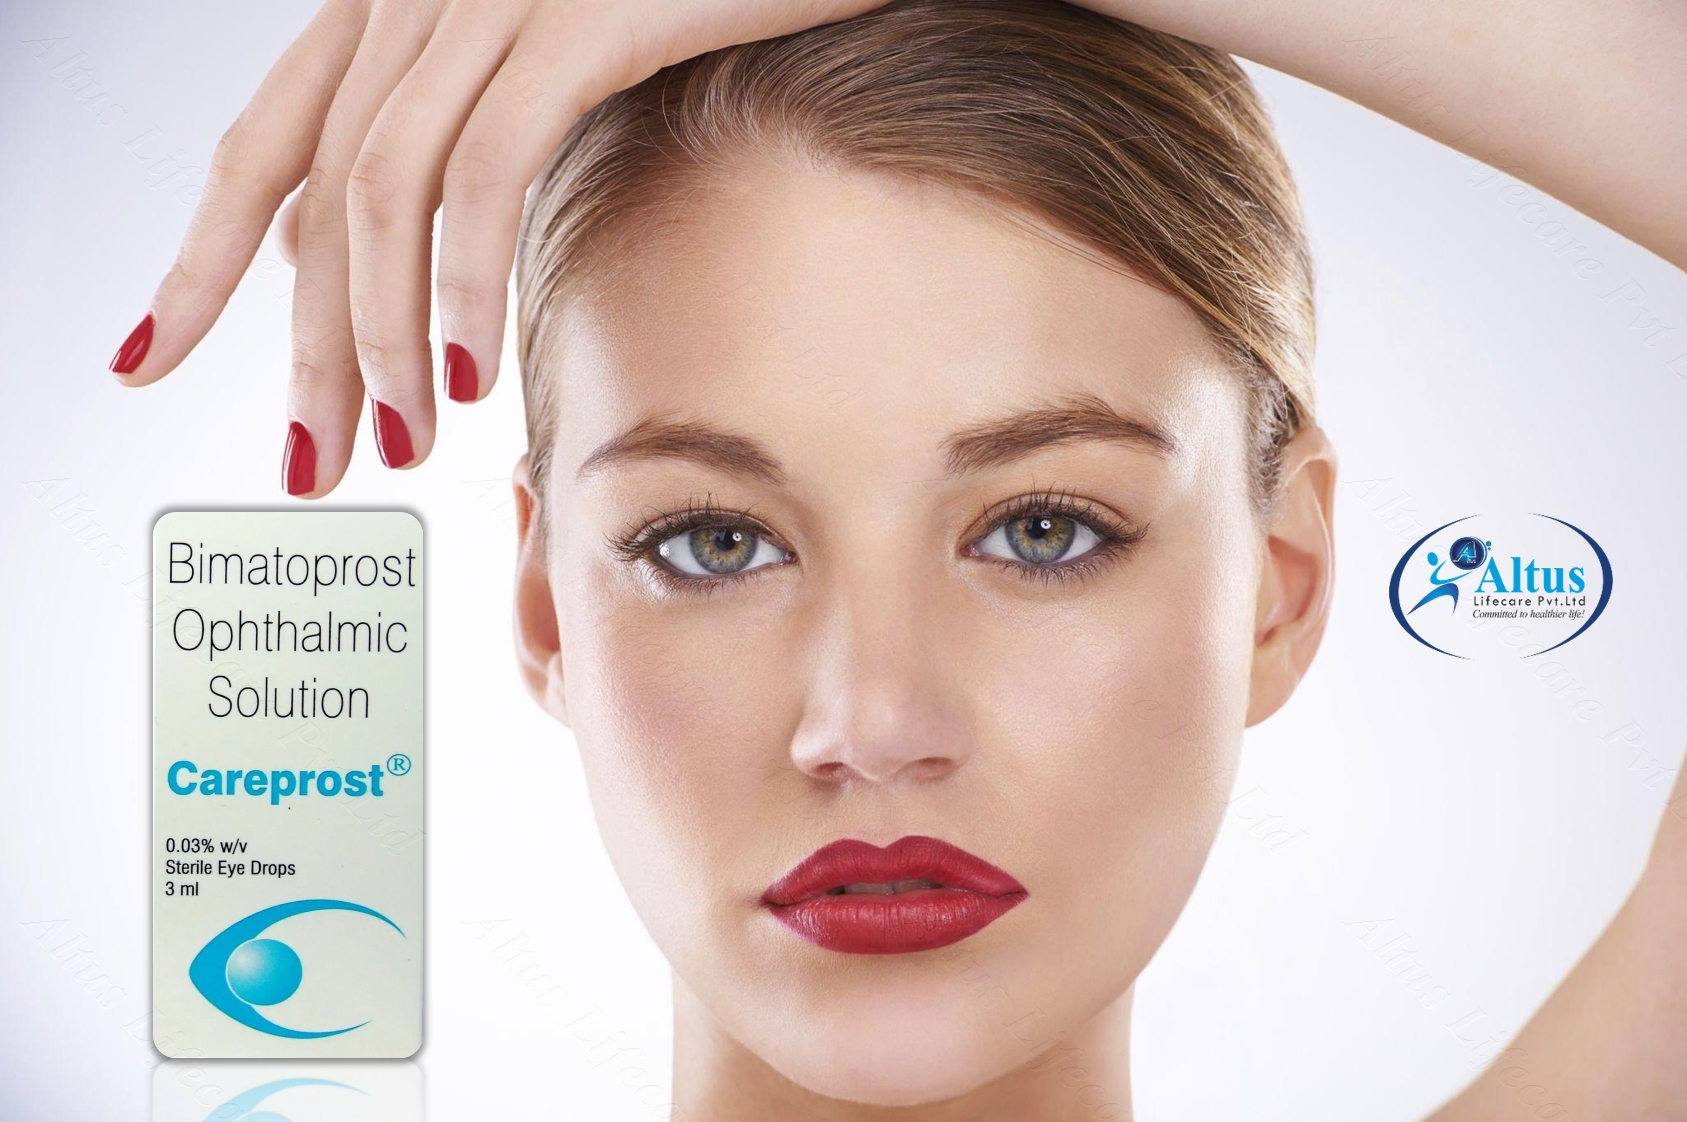 Buy Careprost 3ml | Eye Lash Serum can give your lashes a desirable length and thickness